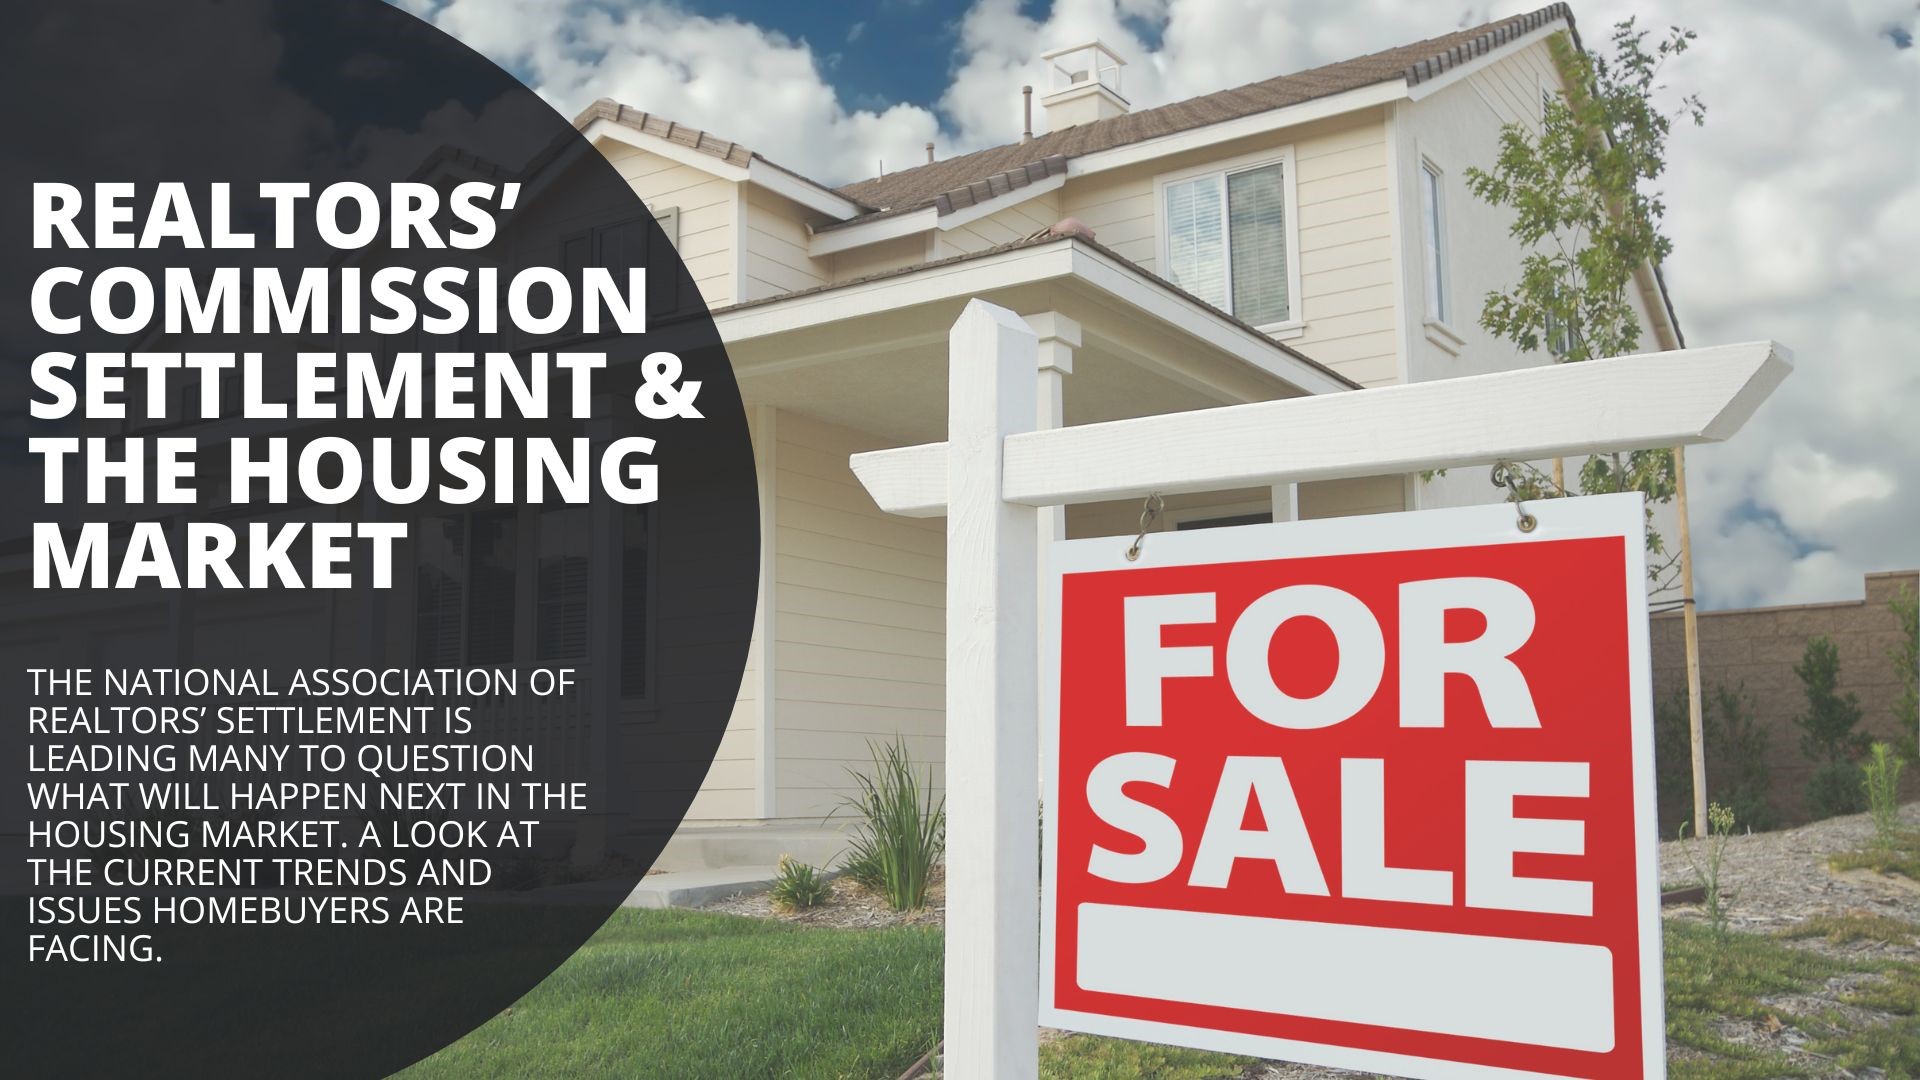 The National Association of Realtors’ settlement has many questioning what will happen next in the housing market. A look at current trends and issues buyers face.